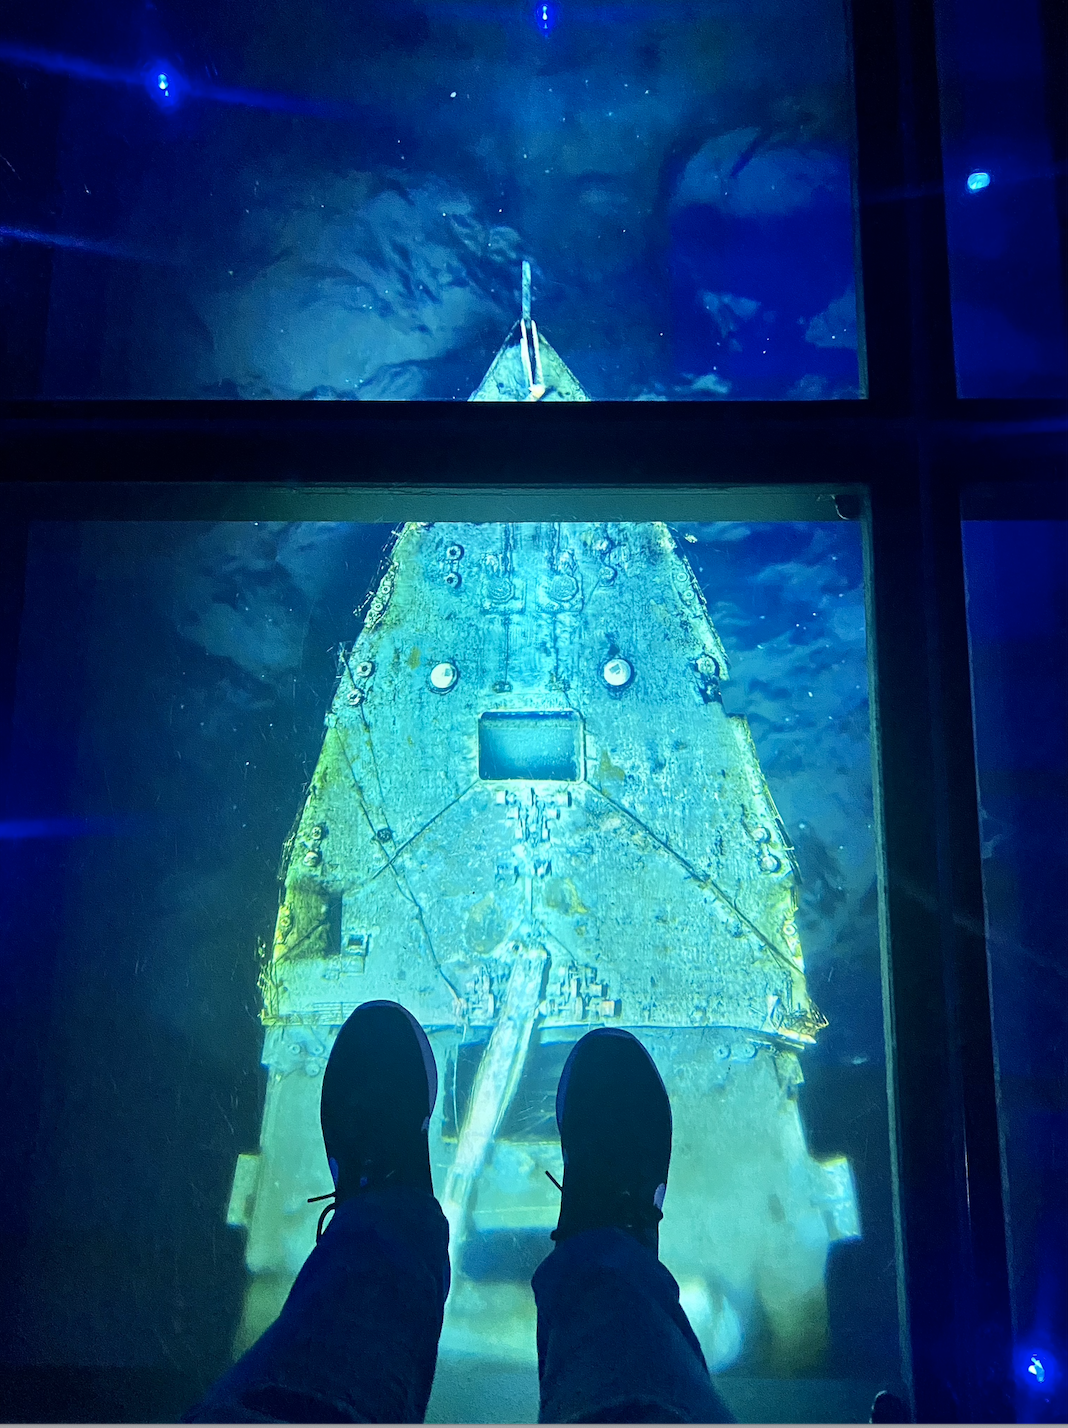 someone standing on glass flooring with the sunken ship below